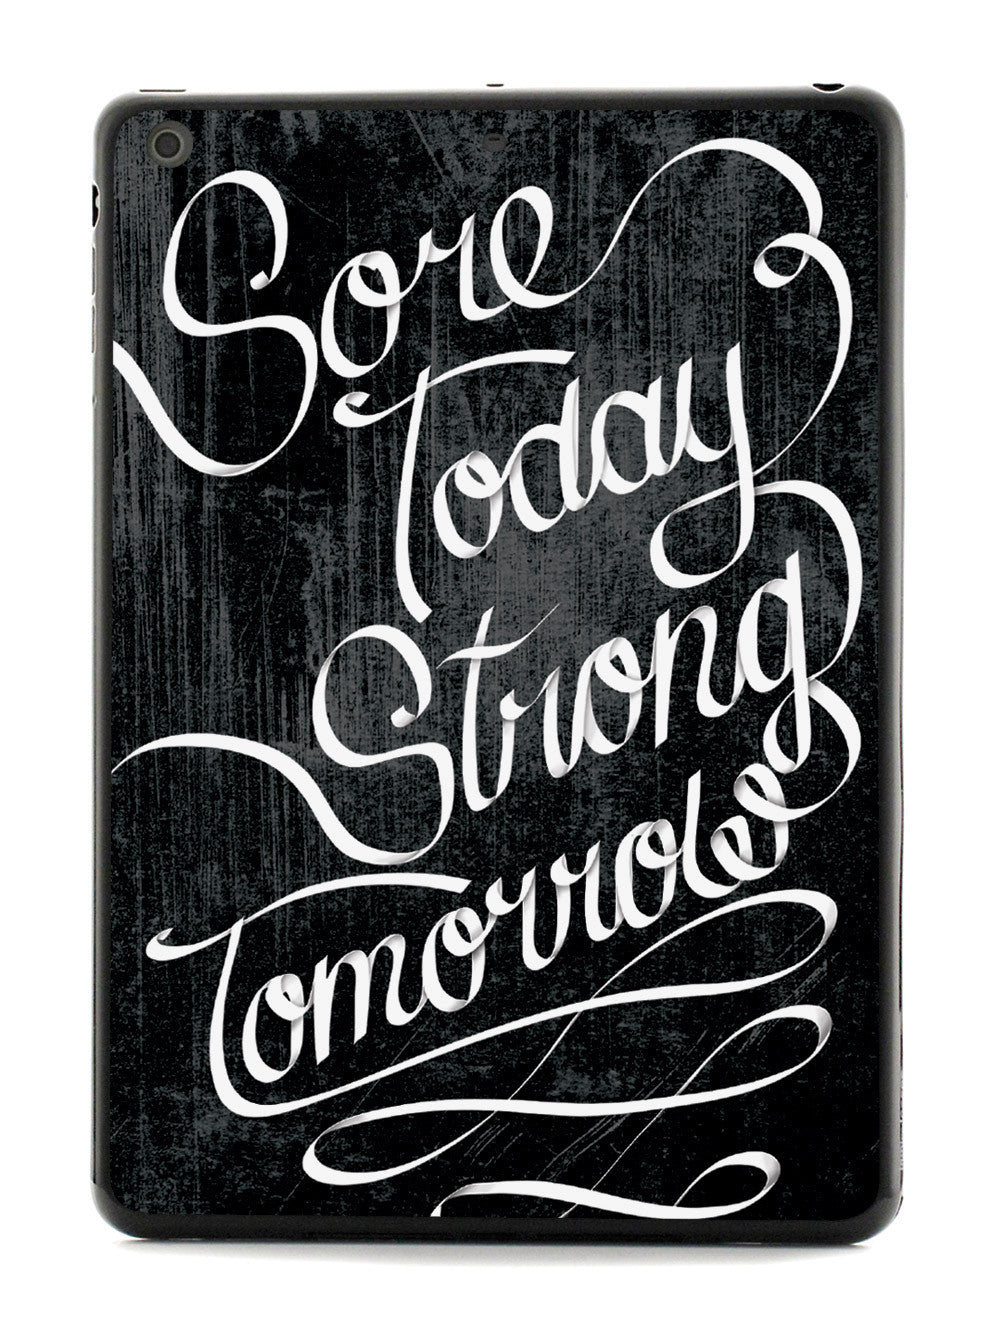 Sore Today, Strong Tomorrow - Fitness Case